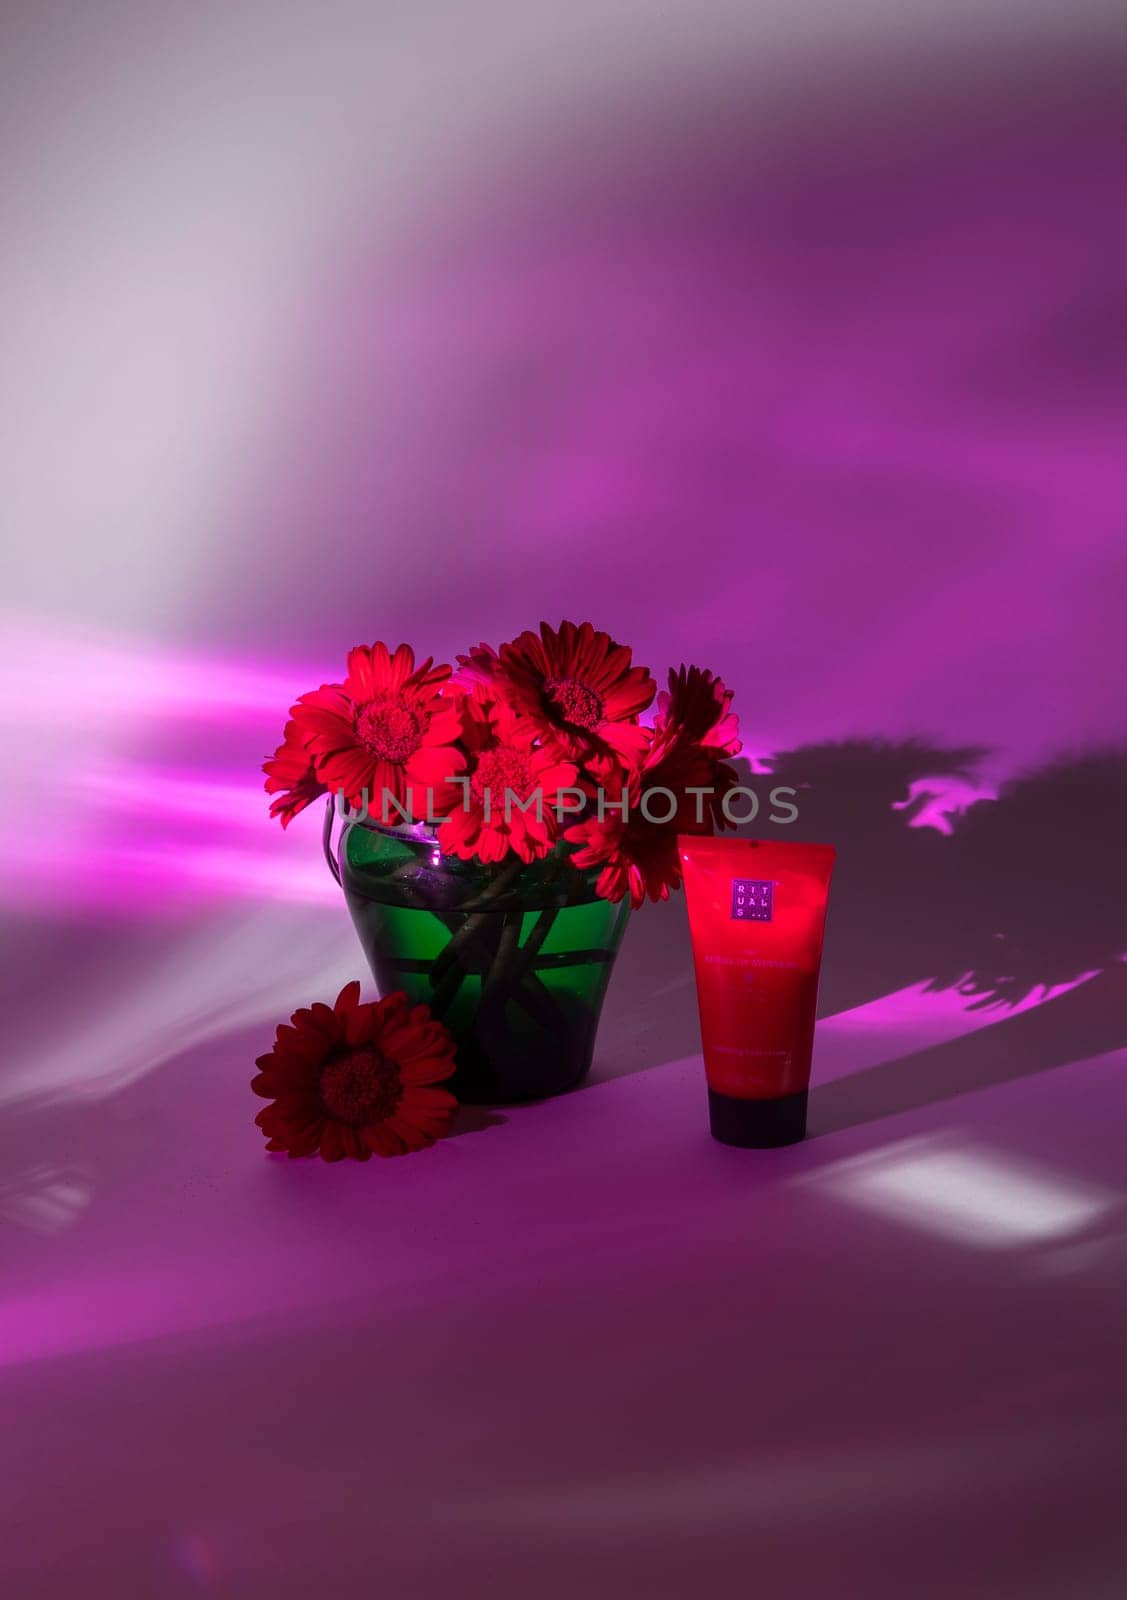 ritual shampou, bright red gerberas in green vase in the multi colored rays,As, Belgium, March 23 2021 by KaterinaDalemans